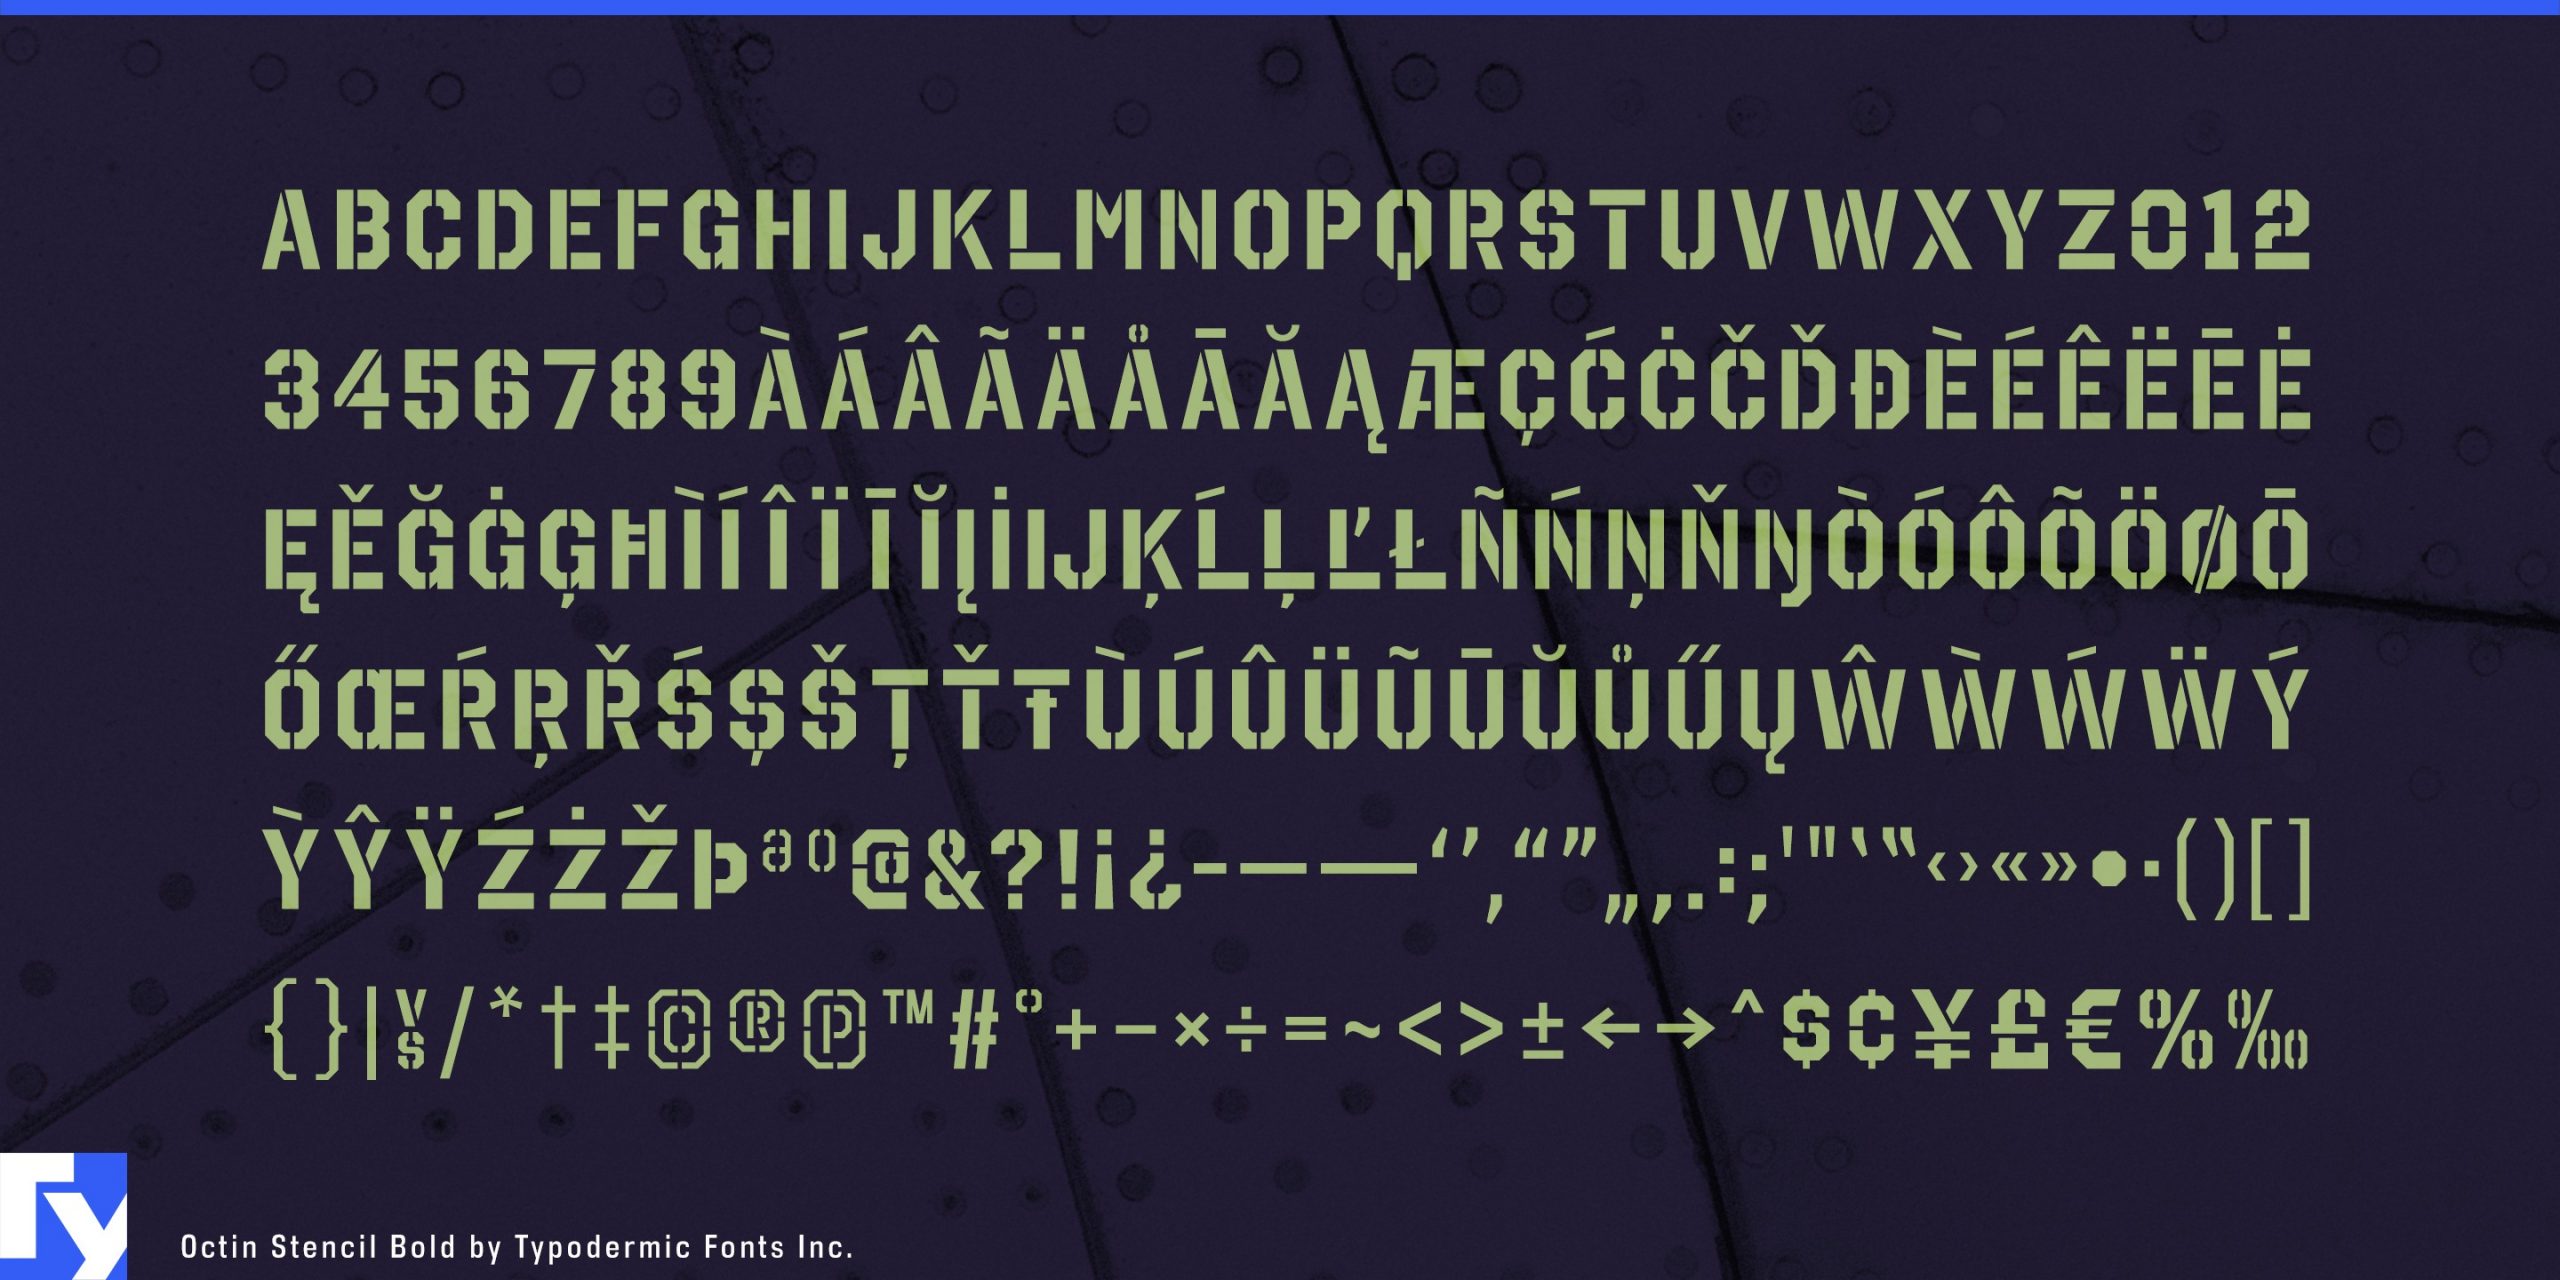 Strength and Resilience: Octin Stencil Typeface Unleashed